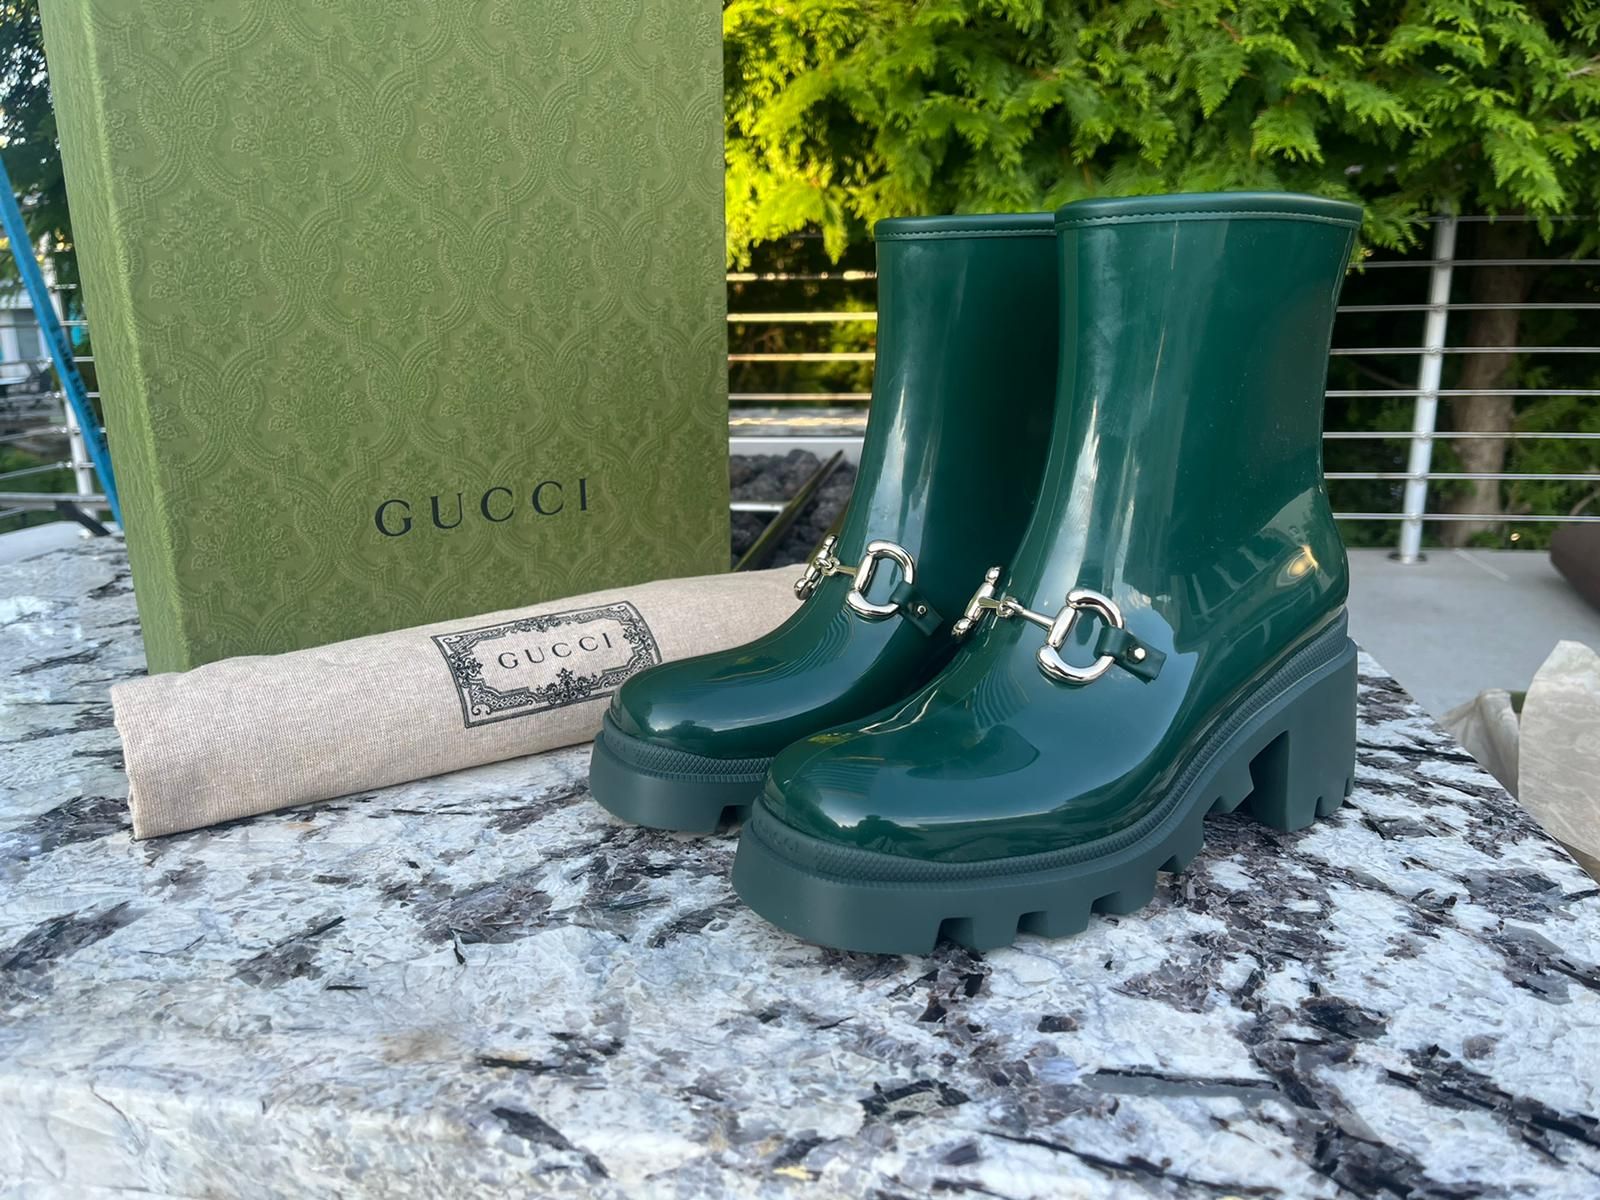 Gucci Horsebit Patent Leather Rainboots in Vintage Green | Grailed